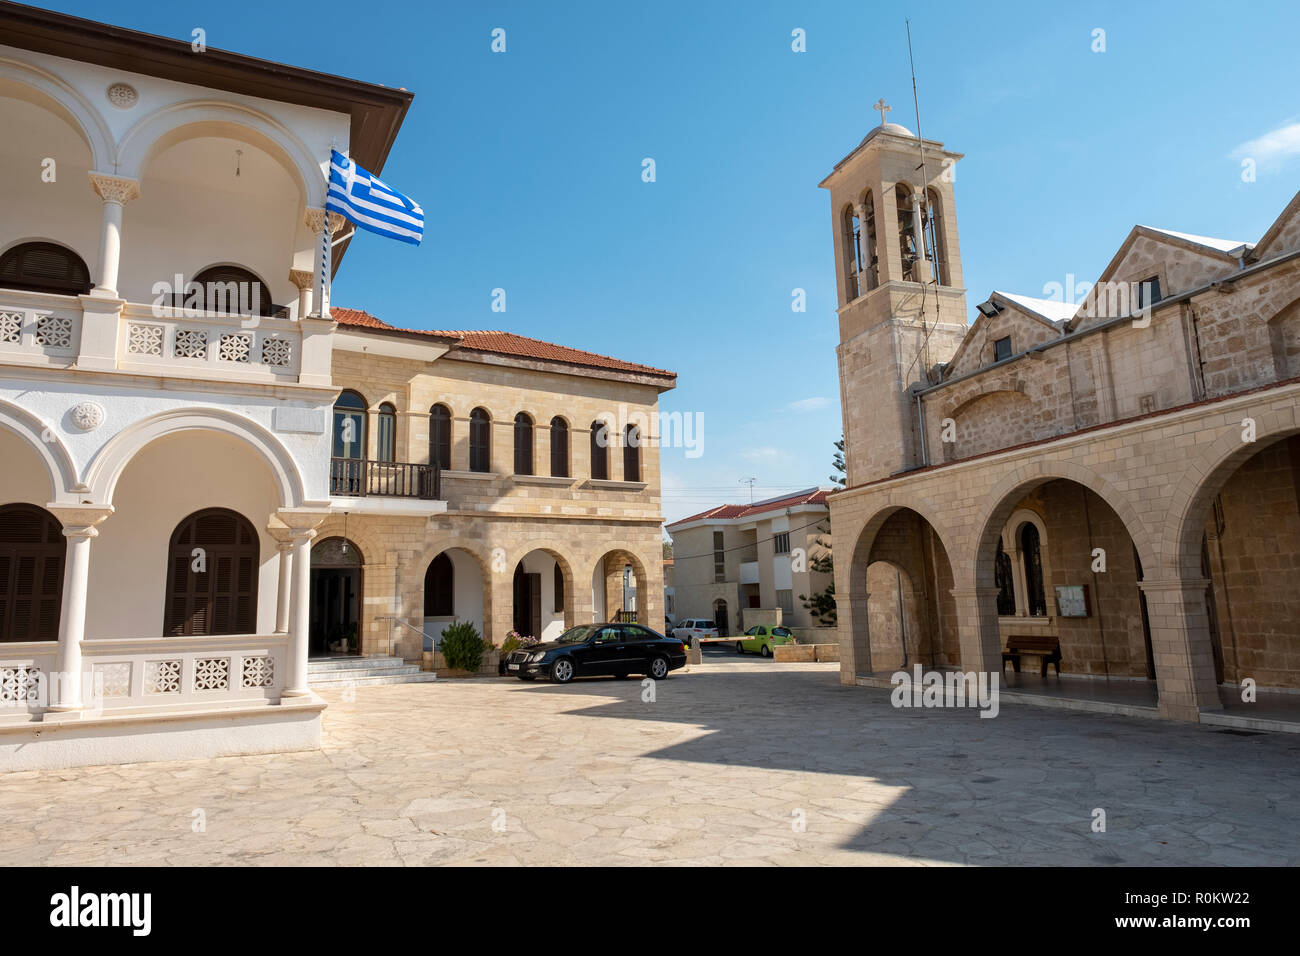 Resistance Square with Holy Bishopric of Pafos on left and Agios Theodoros Cathedral on the right in Paphos Old Town, Cyprus Stock Photo